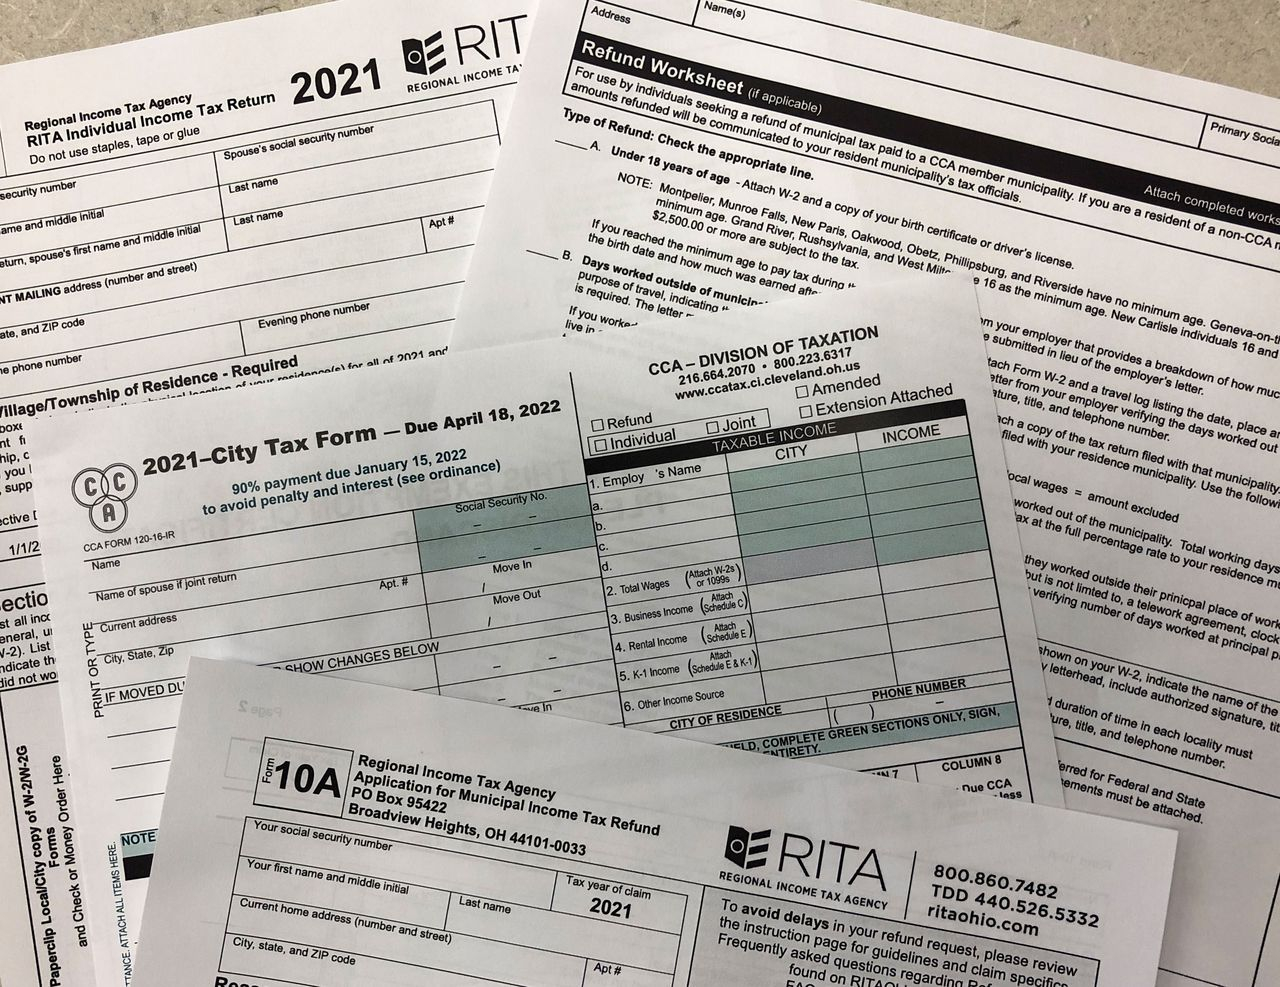 Worked From Home In 2021 City Tax Collectors Are Accepting Tax Refund